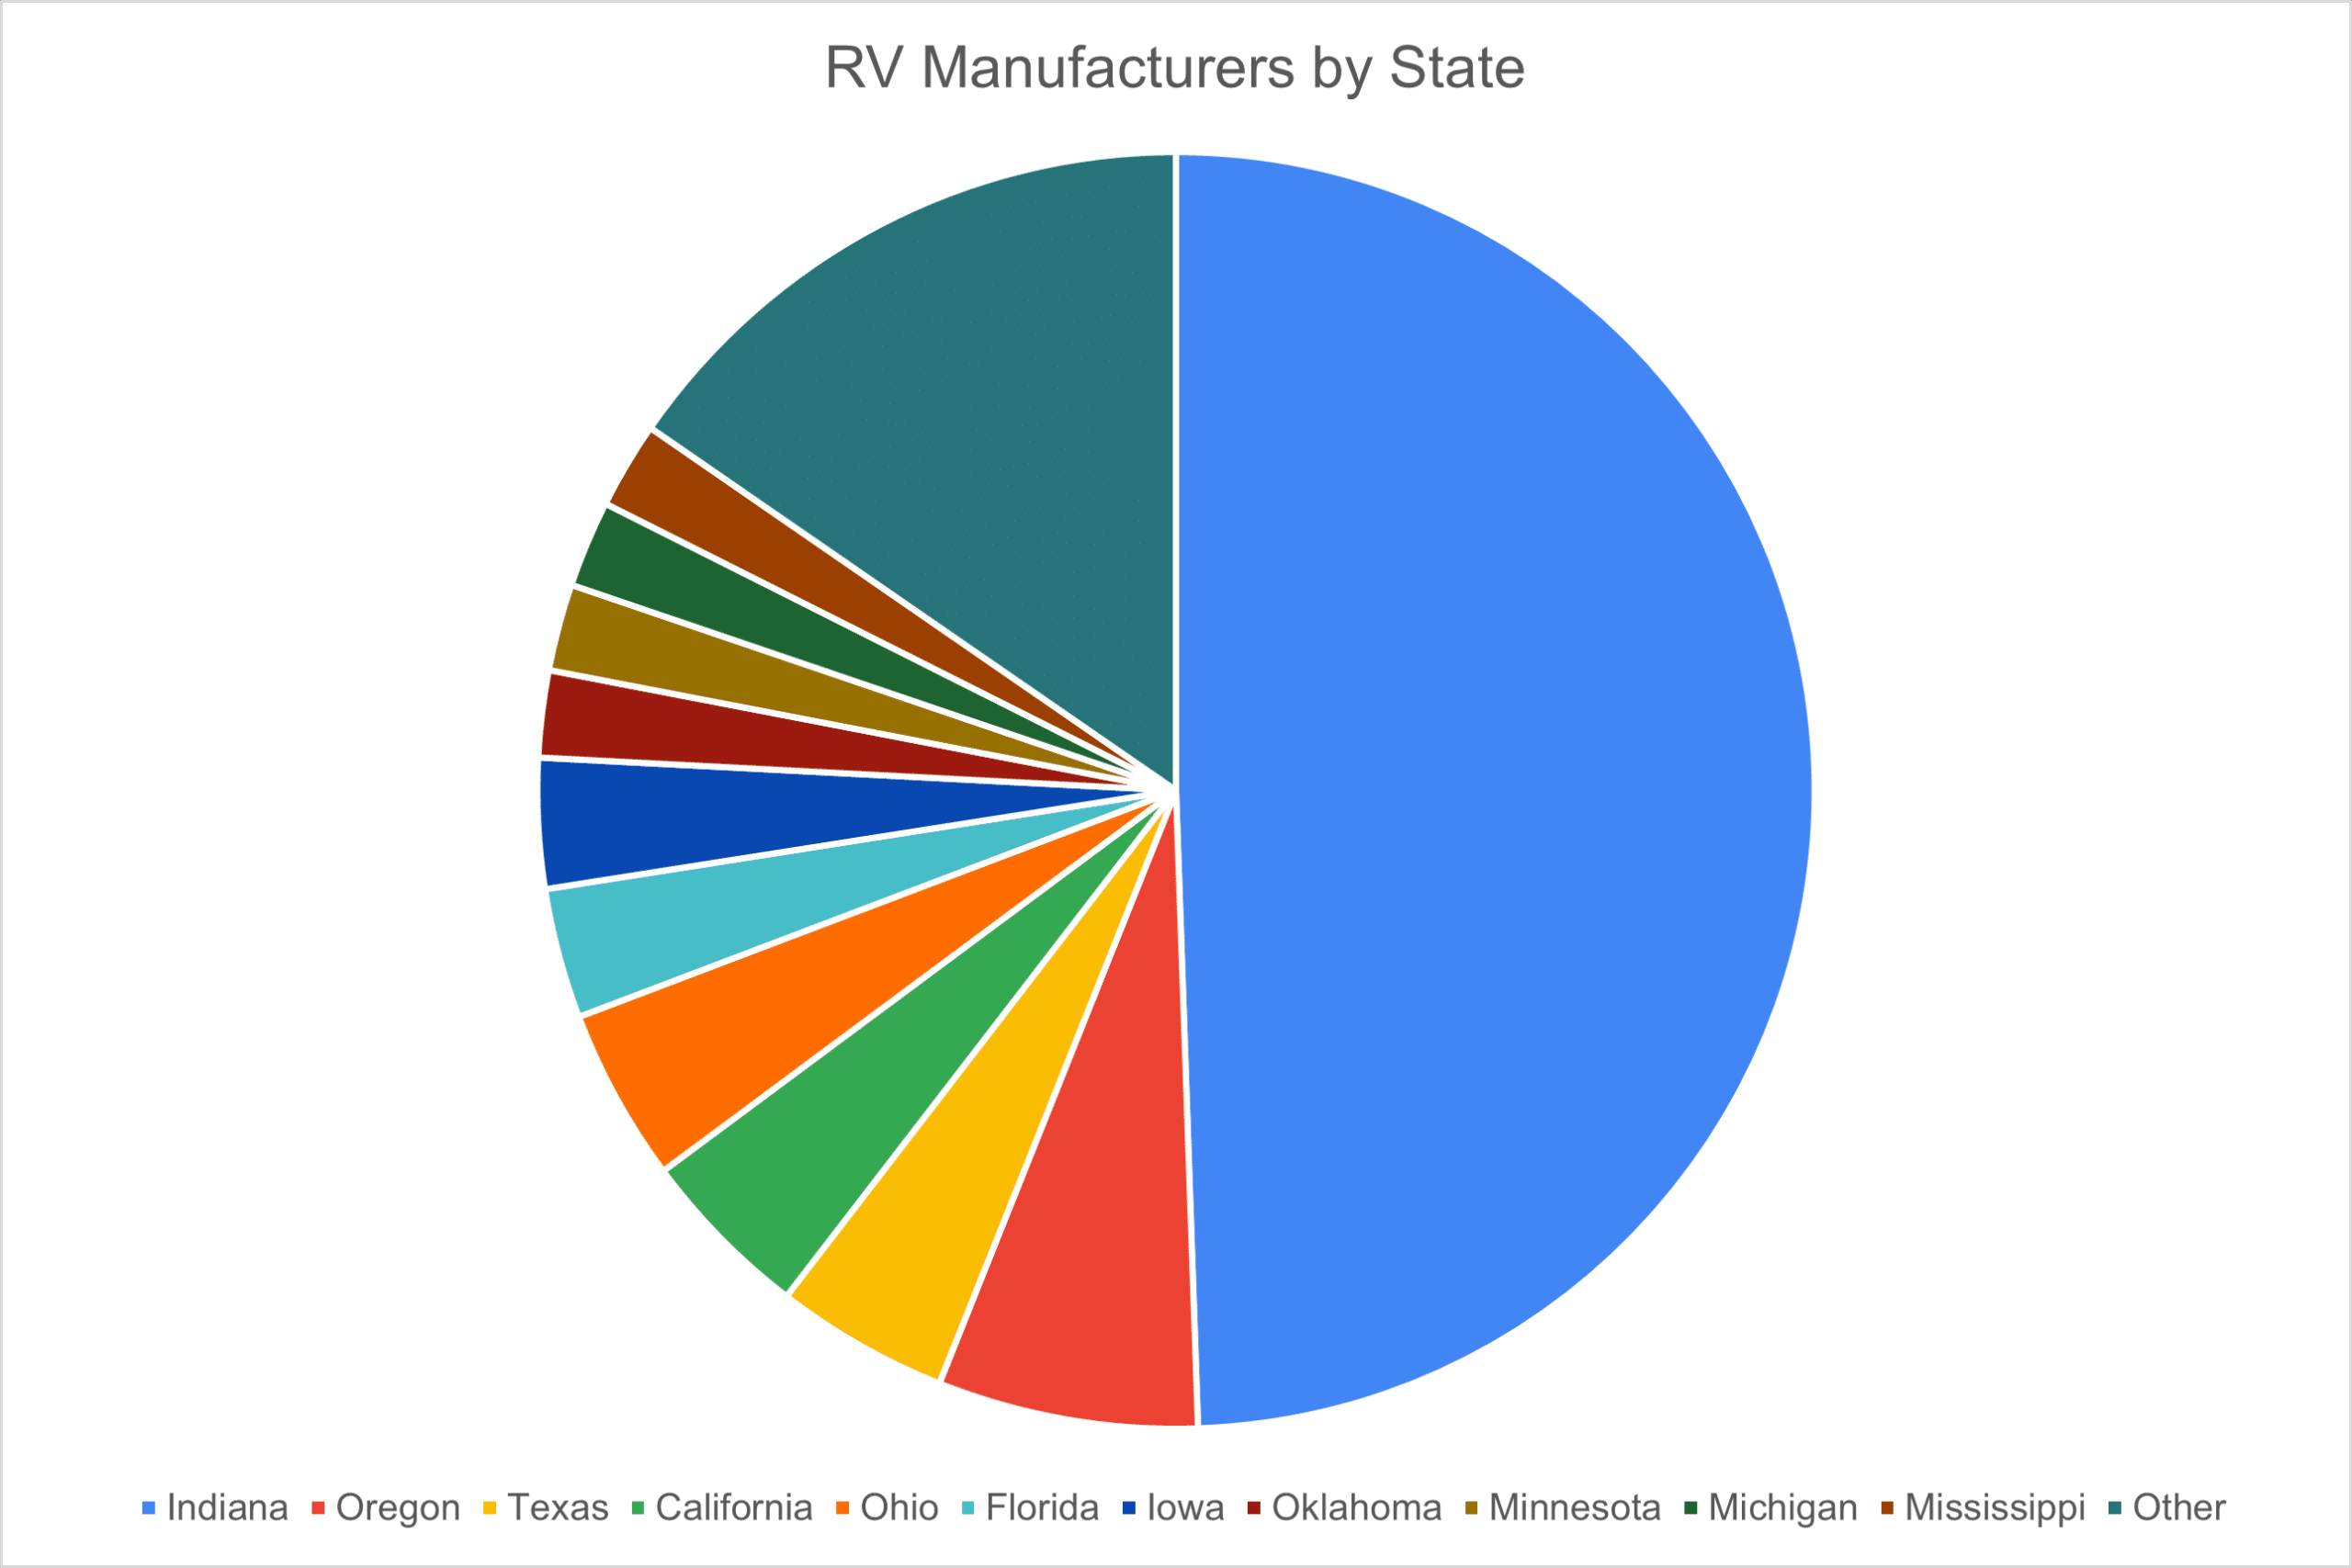 RV manufacturers by state pie chart